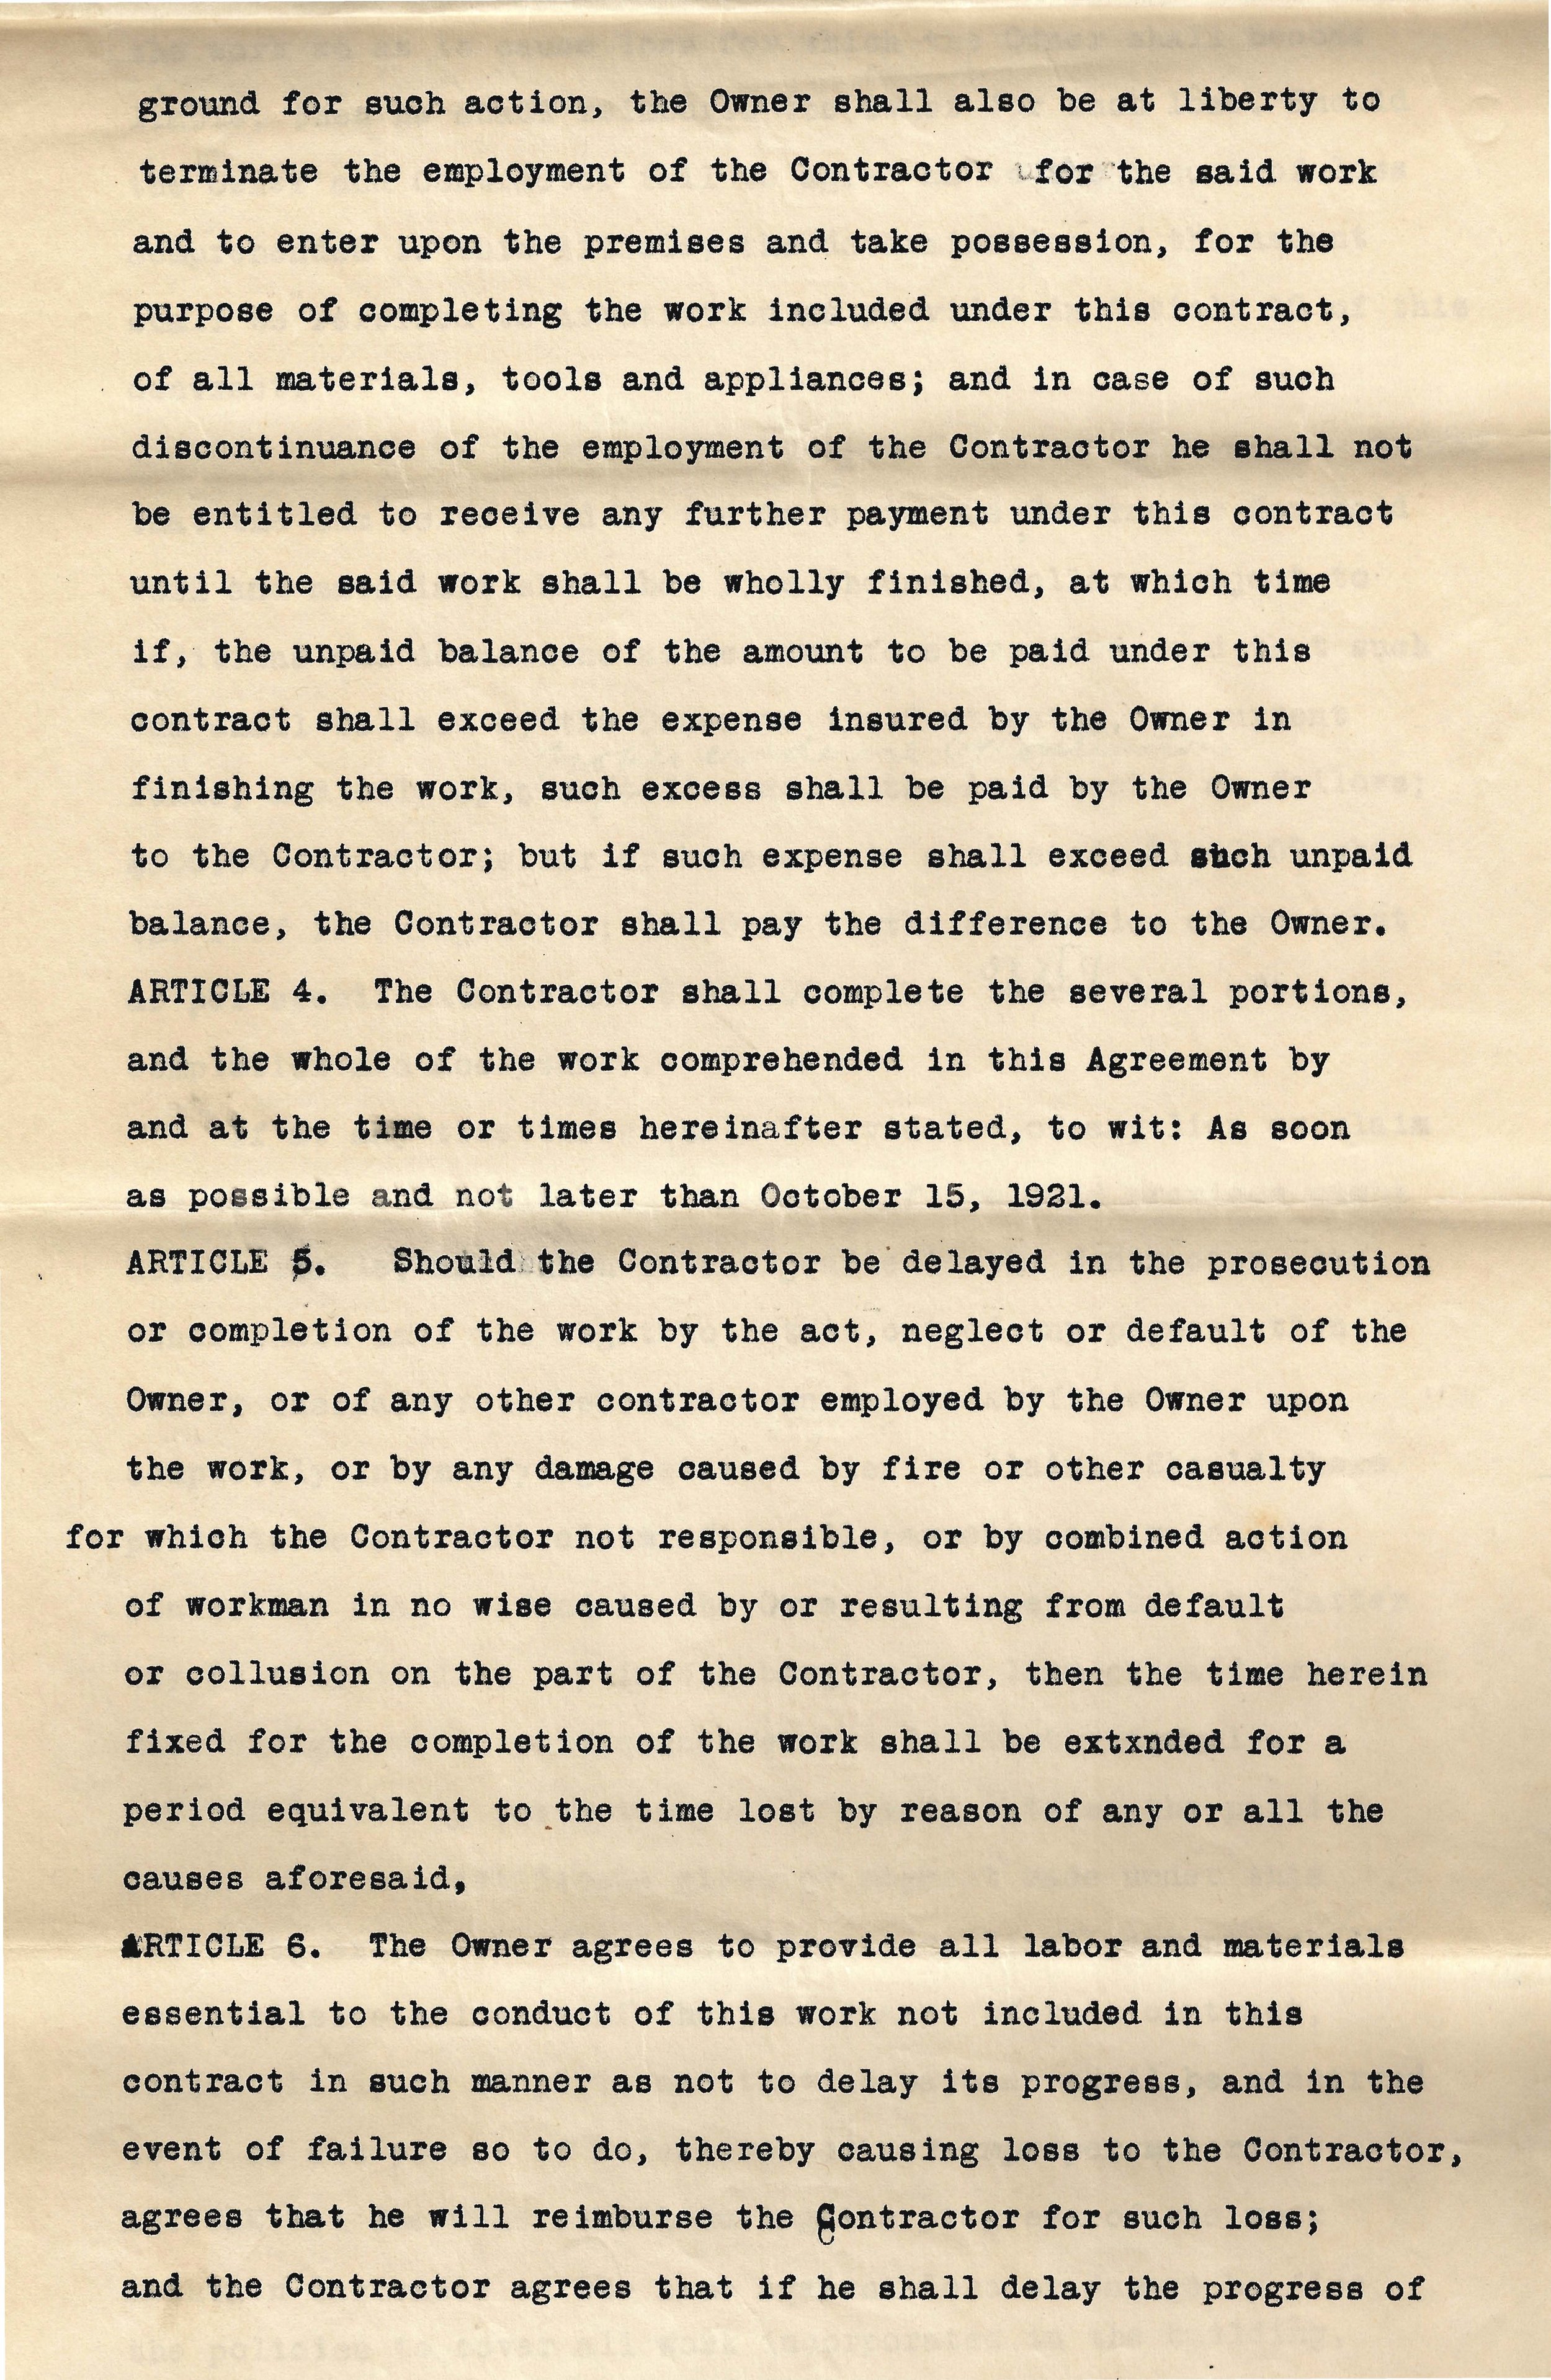 Contractor Agreement (1921)_Page_03.jpg